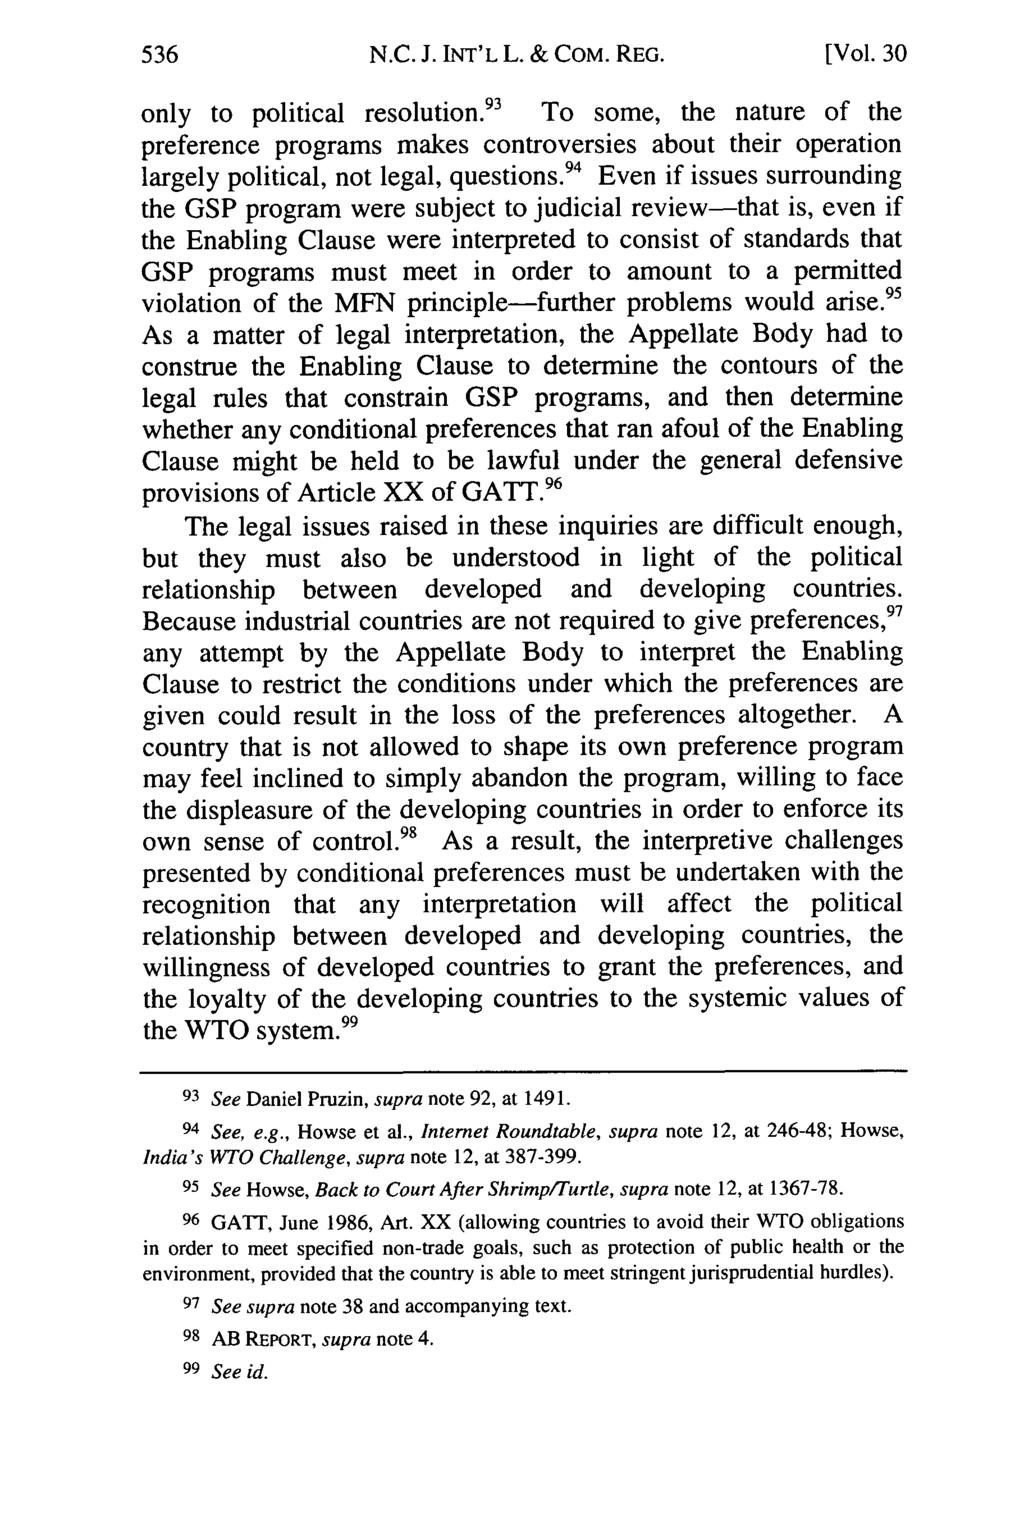 N.C. J. INT'L L. & COM. REG. [Vol. 30 only to political resolution. 93 To some, the nature of the preference programs makes controversies about their operation largely political, not legal, questions.